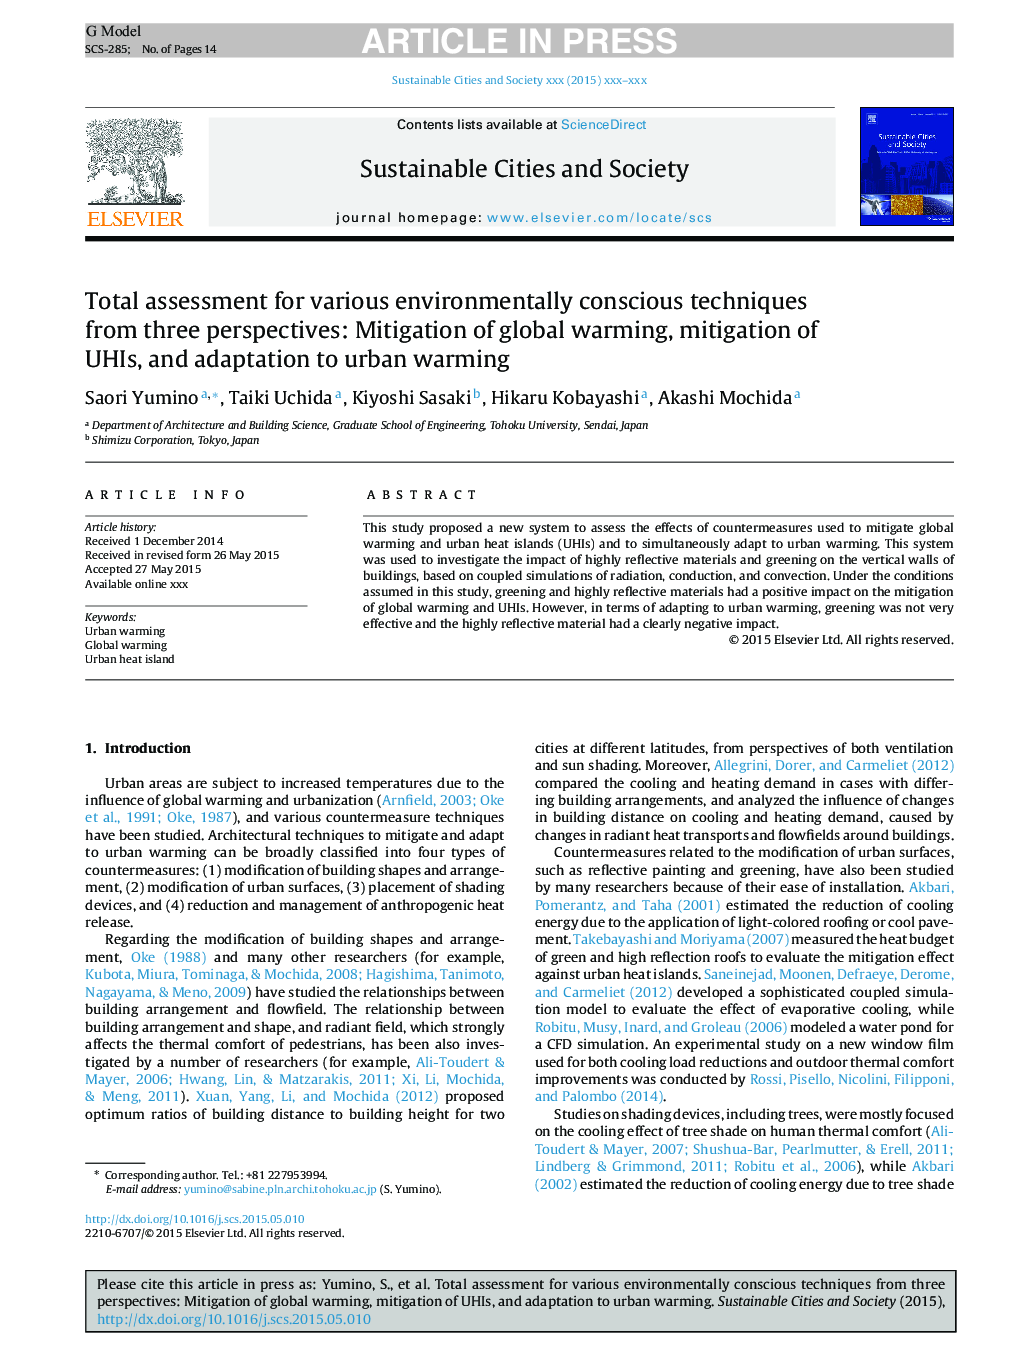 Total assessment for various environmentally conscious techniques from three perspectives: Mitigation of global warming, mitigation of UHIs, and adaptation to urban warming